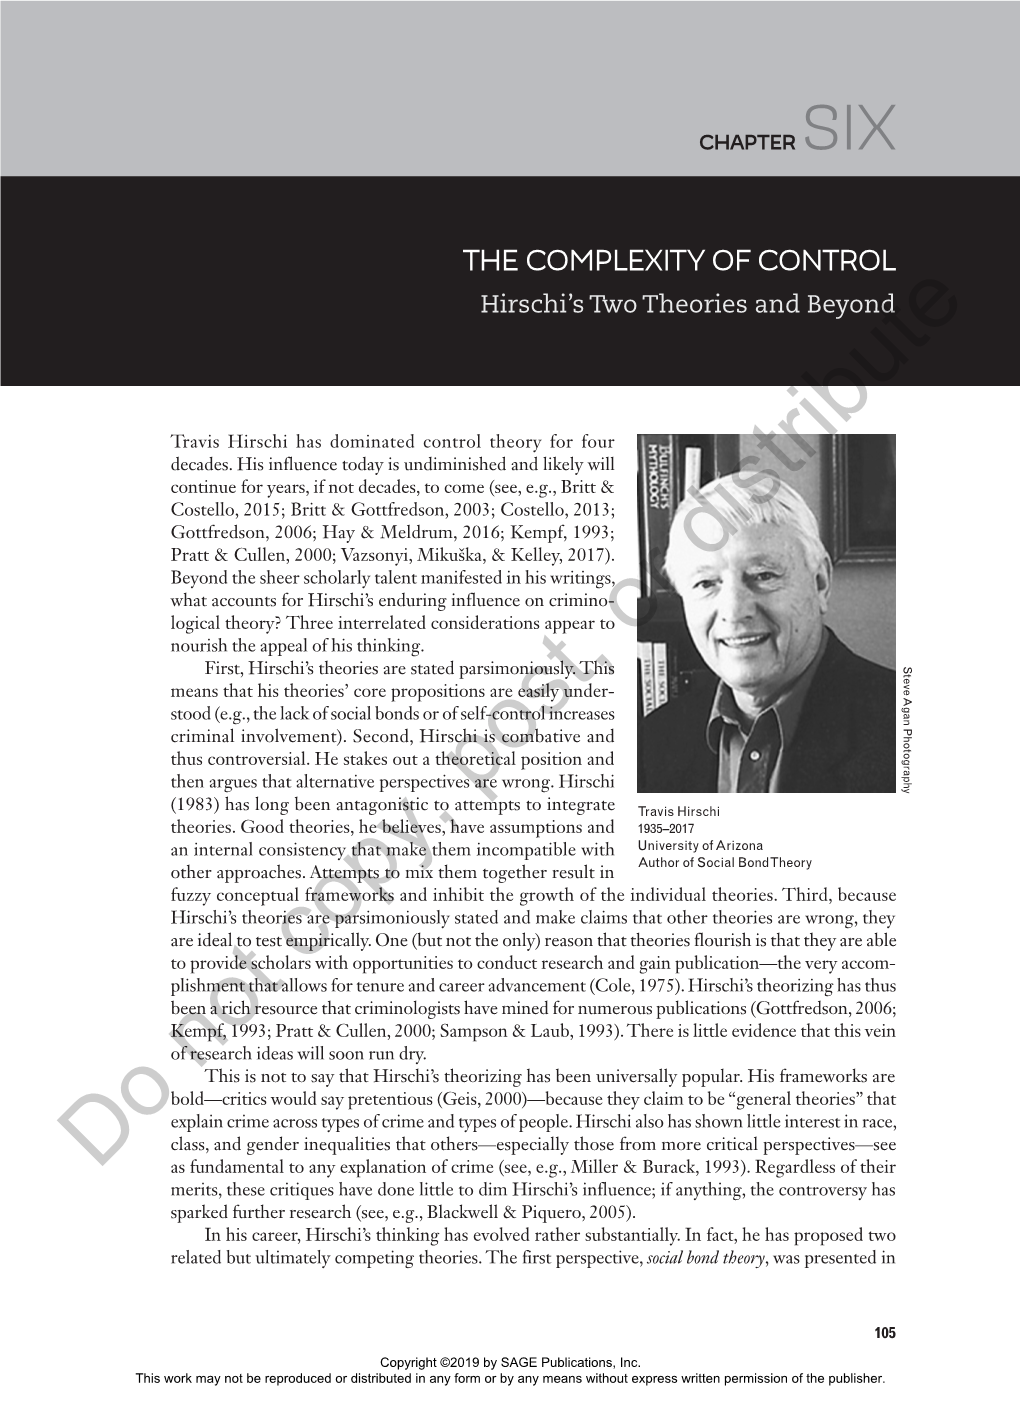 The Complexity of Control: Hirschi's Two Theories and Beyond